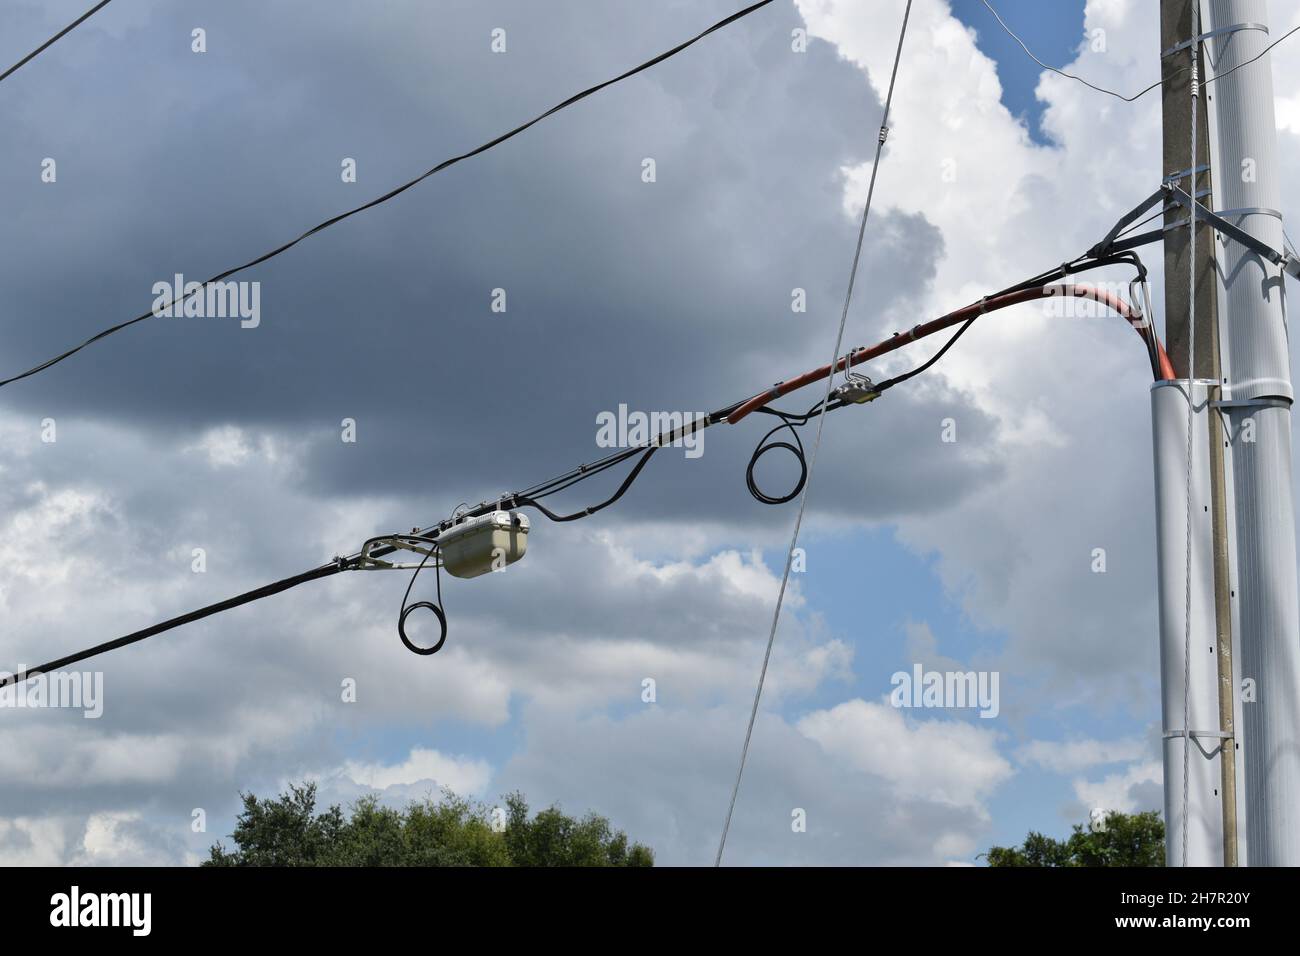 Electrical components attached to utility cable. Stock Photo